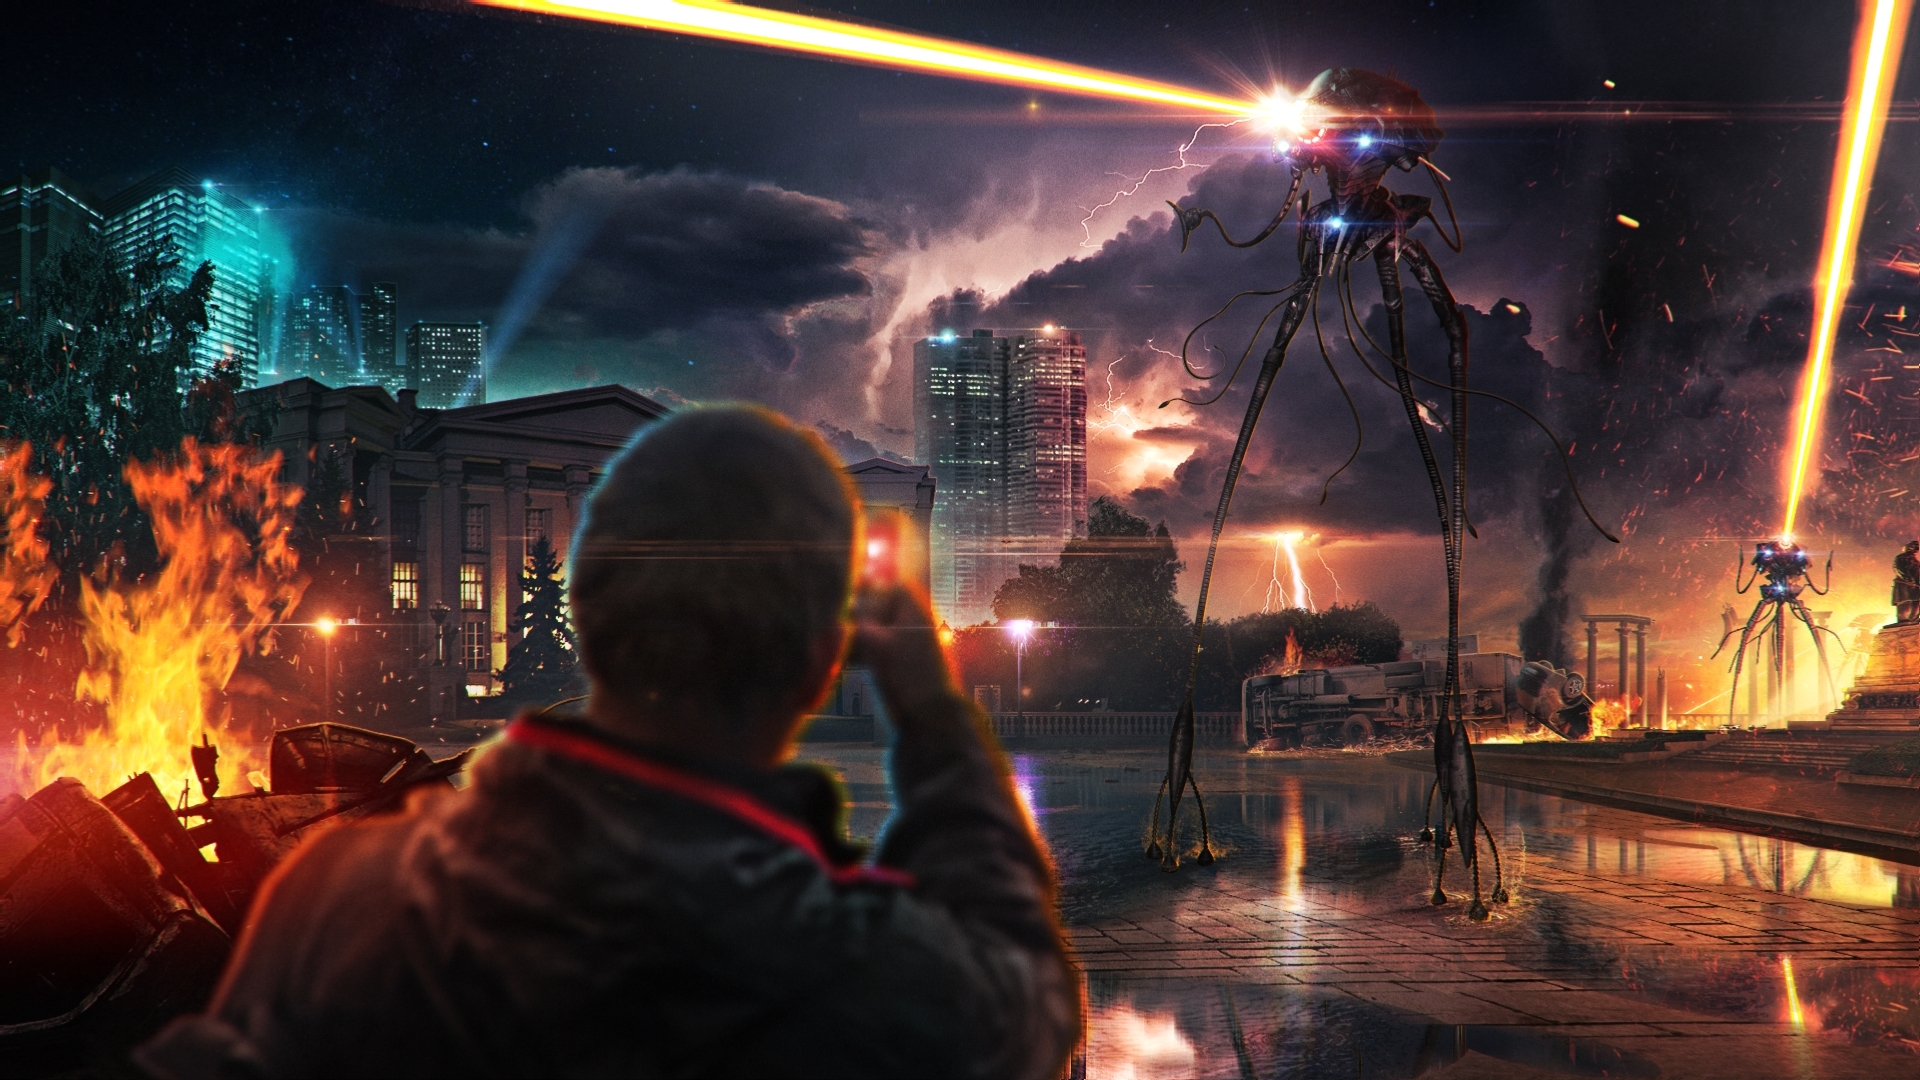 Movies War Of The Worlds Apocalyptic Digital Art Science Fiction Fire 1920x1080